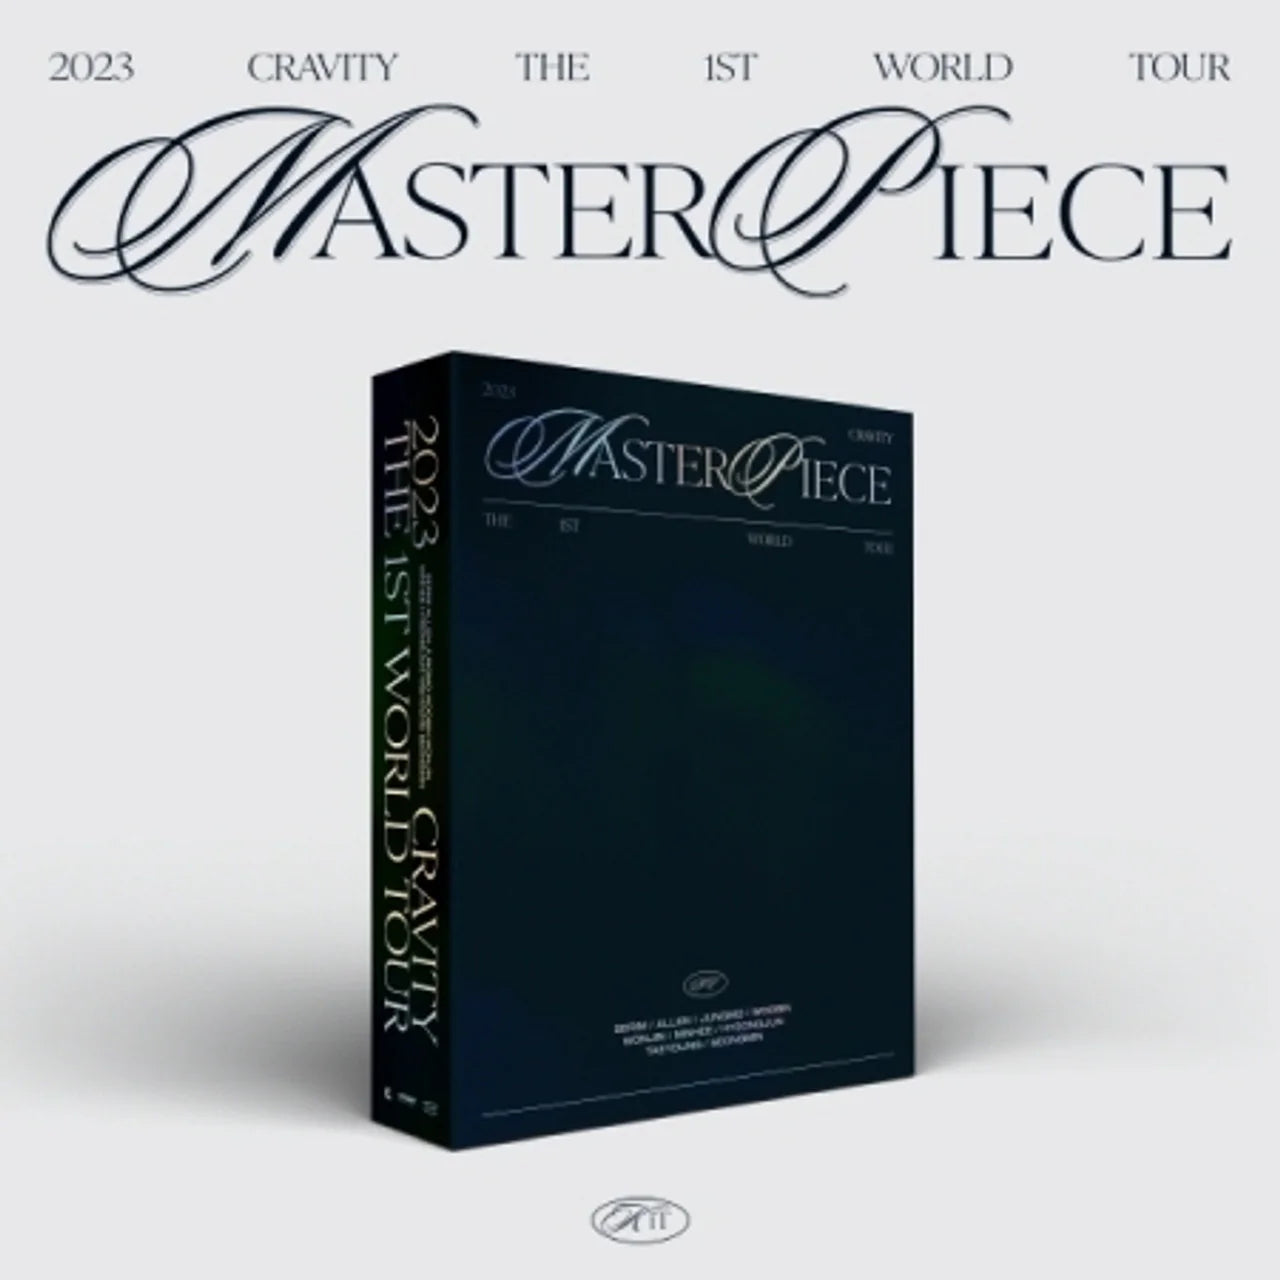 [PRE-ORDER] CRAVITY - MASTERPIECE (The 1st World Tour) Kit Video